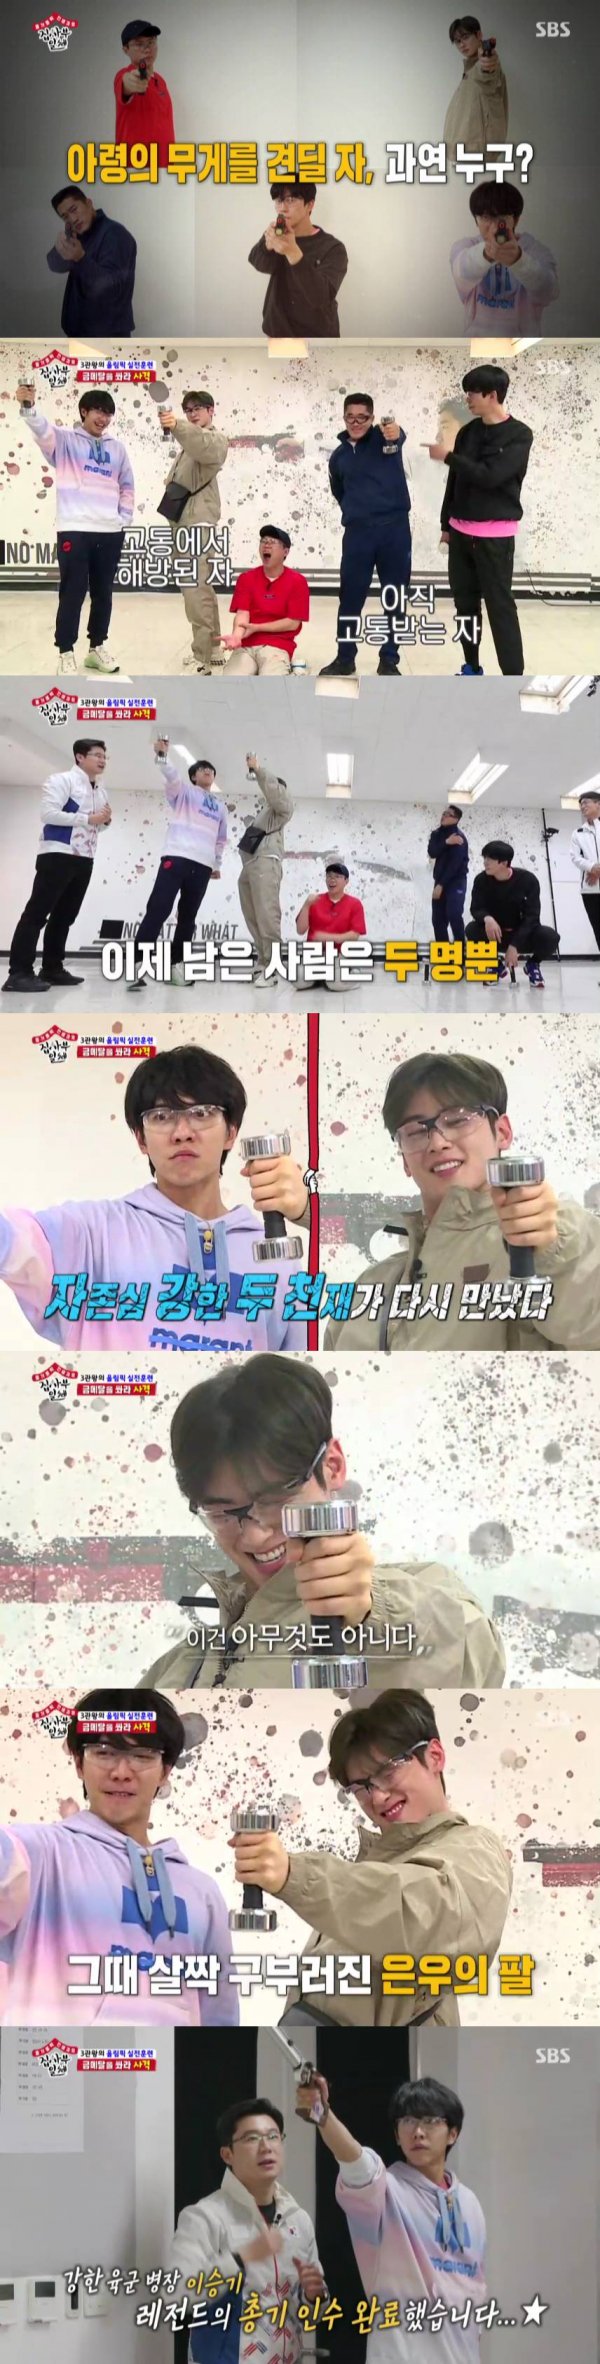 According to Nielsen Korea, SBS All The Butlers, which was broadcast on the 3rd, was ranked # 1 in the same time zone with 2.8% of the 2049 target audience rating (based on the second part of the metropolitan area).Household ratings were 5.2%, and Lee Seung-gi and Cha Eun-woos confrontation was the best one minute with the audience rating per minute rising to 6.2%.On this day, Lee Seung-gi, Shin Sung-rok, Yang Se-hyeong, Cha Eun-woo, and Kim Dong-Hyun were shown spending the day with Olympic legend master Yang Hak-sun, Lee Dae-hoon and Jin Jong-oh.First, Kim Dong-Hyun appeared with Cha Eun-woo with an assistant dress and surprised the members.Cha Eun-woo said, Today, I will join my brothers and members of All The Butlers. I will do my best. I will report it.Kim Dong-Hyun said, This is why I will finish the ceremony for one person including Cha Eun-woo today. Lee Seung-gi said, What happened to Cha Eun-woo and one other person?Kim Dong-Hyun then told the mission that he had to run on the chiropractic plate for 83 seconds to meet the master. The members were distressed and succeeded in the mission safely.However, at this time, the number 365 appeared on the monitor screen again, and the production team delivered an additional mission saying, We should do it again for 365 seconds.The members decided to take a limited class lesson from the masters. First, Master Lee Dae-hoons Taekwondo lecture began.Prior to the full-scale class, Lee Dae-hoon was impressed by the ability to kick over the members heads.The members then suggested, Lets go back this time, and Lee Dae-hoon decided to follow the paper cup on Kim Dong-Hyuns head.At this time, Yang Se-hyeong hit Kim Dong-Hyuns back with his shoes to tease Kim Dong-Hyun, and the rest of the members laughed for him.However, Lee Dae-hoon accidentally hit Kim Dong-Hyun in the back of the head at the actual kicking demonstration, and Kim Dong-Hyun shouted You are the one and made everyone laugh.Lee Dae-hoon, meanwhile, cited one more step as the key to victory: Taekwondo is to maintain accurate RBI, power and speed.So I always think of Exercise as one more kick and keep my stamina by repeating it a lot, he said, and when I reach the limit, I think I have been training without giving up, thinking, one more foot.The next place for the members who had been trained by Lee Dae-hoon was Master Jin Jong-ohs shooting range.He revealed that he was living as he planned, revealing his actual training schedule, and even focused on his attention, saying, I want to see the defecation at a fixed time to solve the physiological phenomenon.(Shooting) is static, so if you dont clear the chapter, its a hindrance. Im going to watch it because of my promise to myself.Since then, Jin Jong-oh has handed the members a 3kg dumbbell, saying, Lets make sure the basics of shooting are clear.Ill give the best man with a blindfold the chance to shoot a real shot at my game, he said.The members said, I can last 30 minutes and I will sleep a little, but it was not easy to hold on with a 3kg dumbbell with one hand.Following Shin Sung-rok, Yang Se-hyeong and Kim Dong-Hyun were eliminated in the order of the one-on-one confrontation between Lee Seung-gi and Cha Eun-woo.The pair held on well together for quite a long time, but the last Cha Eun-woos elbow was bent, leaving Lee Seung-gi to win.On the day of the victory, Cha Eun-woos pride showdown raised questions about the result and won the best one minute with 6.2% of the audience rating per minute.